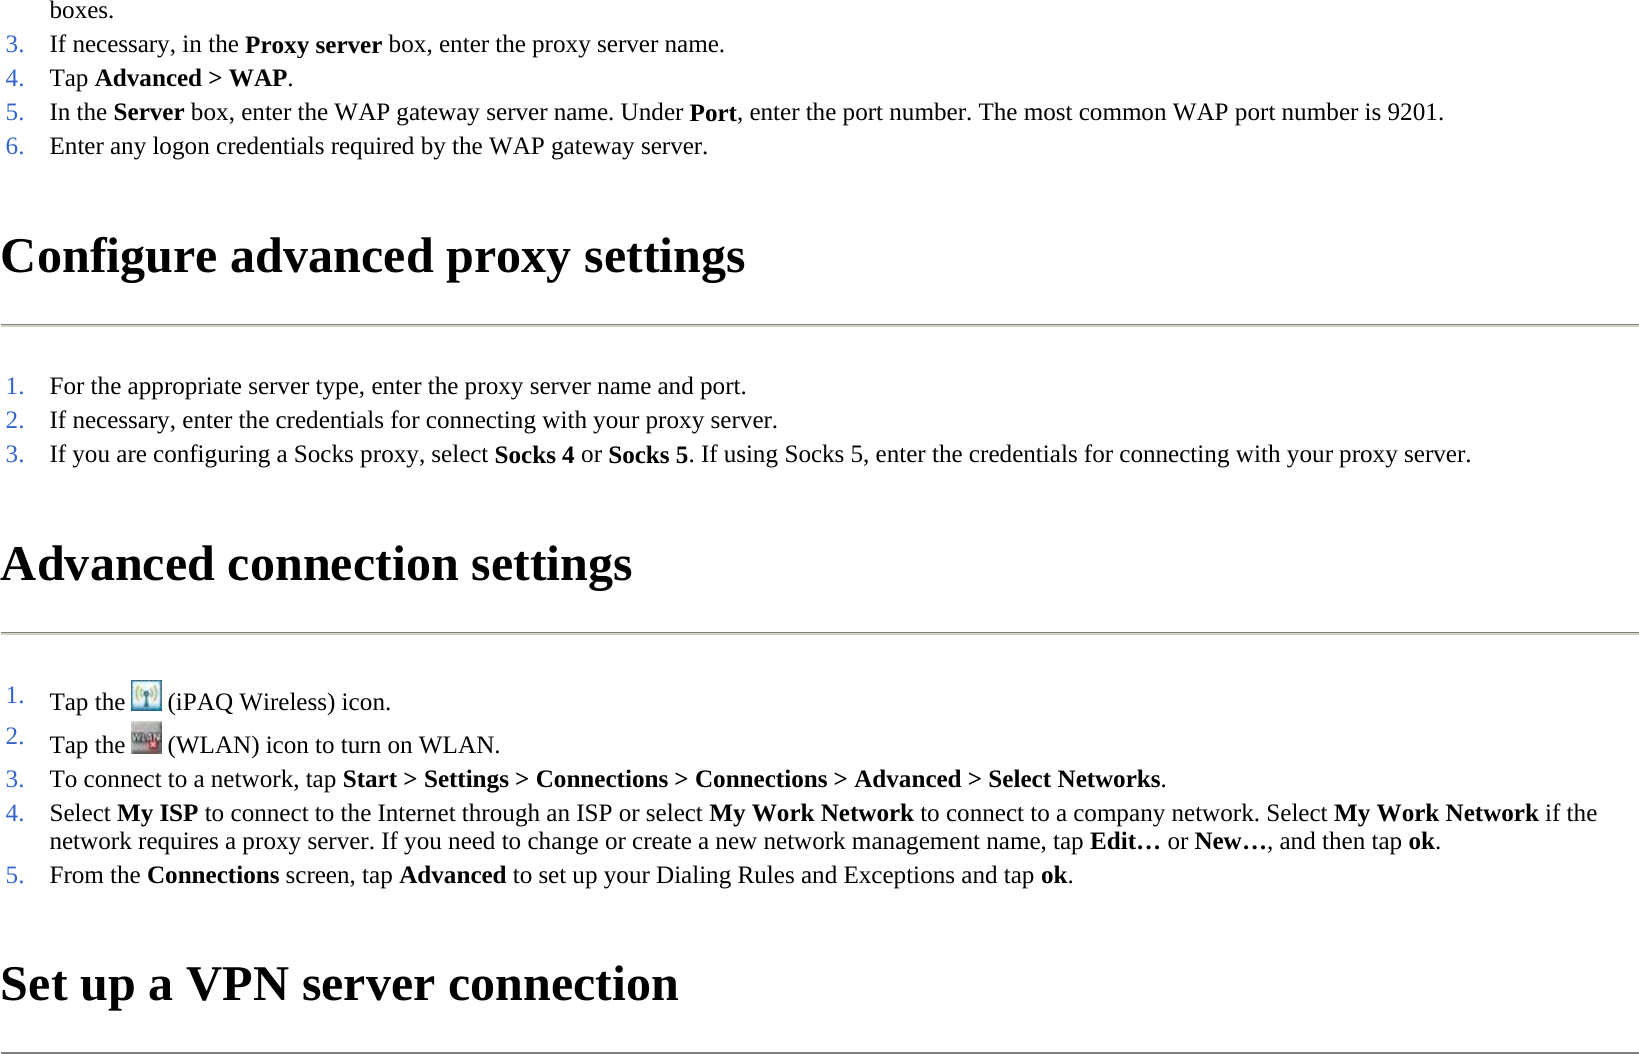 Configure advanced proxy settings  Advanced connection settings  Set up a VPN server connection  boxes. 3. If necessary, in the Proxy server box, enter the proxy server name.4. Tap Advanced &gt;WAP.5. In the Server box, enter the WAP gateway server name. UnderPort, enter the port number. The most common WAP port number is 9201.6. Enter any logon credentials required by the WAP gateway server.1. For the appropriate server type, enter the proxy server name and port.2. If necessary, enter the credentials for connecting with your proxy server.3. If you are configuring a Socks proxy, selectSocks 4 orSocks 5. If using Socks 5, enter the credentials for connecting with your proxy server.1. Tap the   (iPAQ Wireless) icon. 2. Tap the   (WLAN) icon to turn on WLAN.3. To connect to a network, tap Start &gt; Settings &gt; Connections &gt;Connections &gt;Advanced &gt;Select Networks.4. Select My ISP to connect to the Internet through an ISP or select My Work Network to connect to a company network. Select My Work Network if the network requires a proxy server. If you need to change or create a new network management name, tapEdit… orNew…, and then tapok.5. From the Connections screen, tap Advanced to set up your Dialing Rules and Exceptions and tapok.